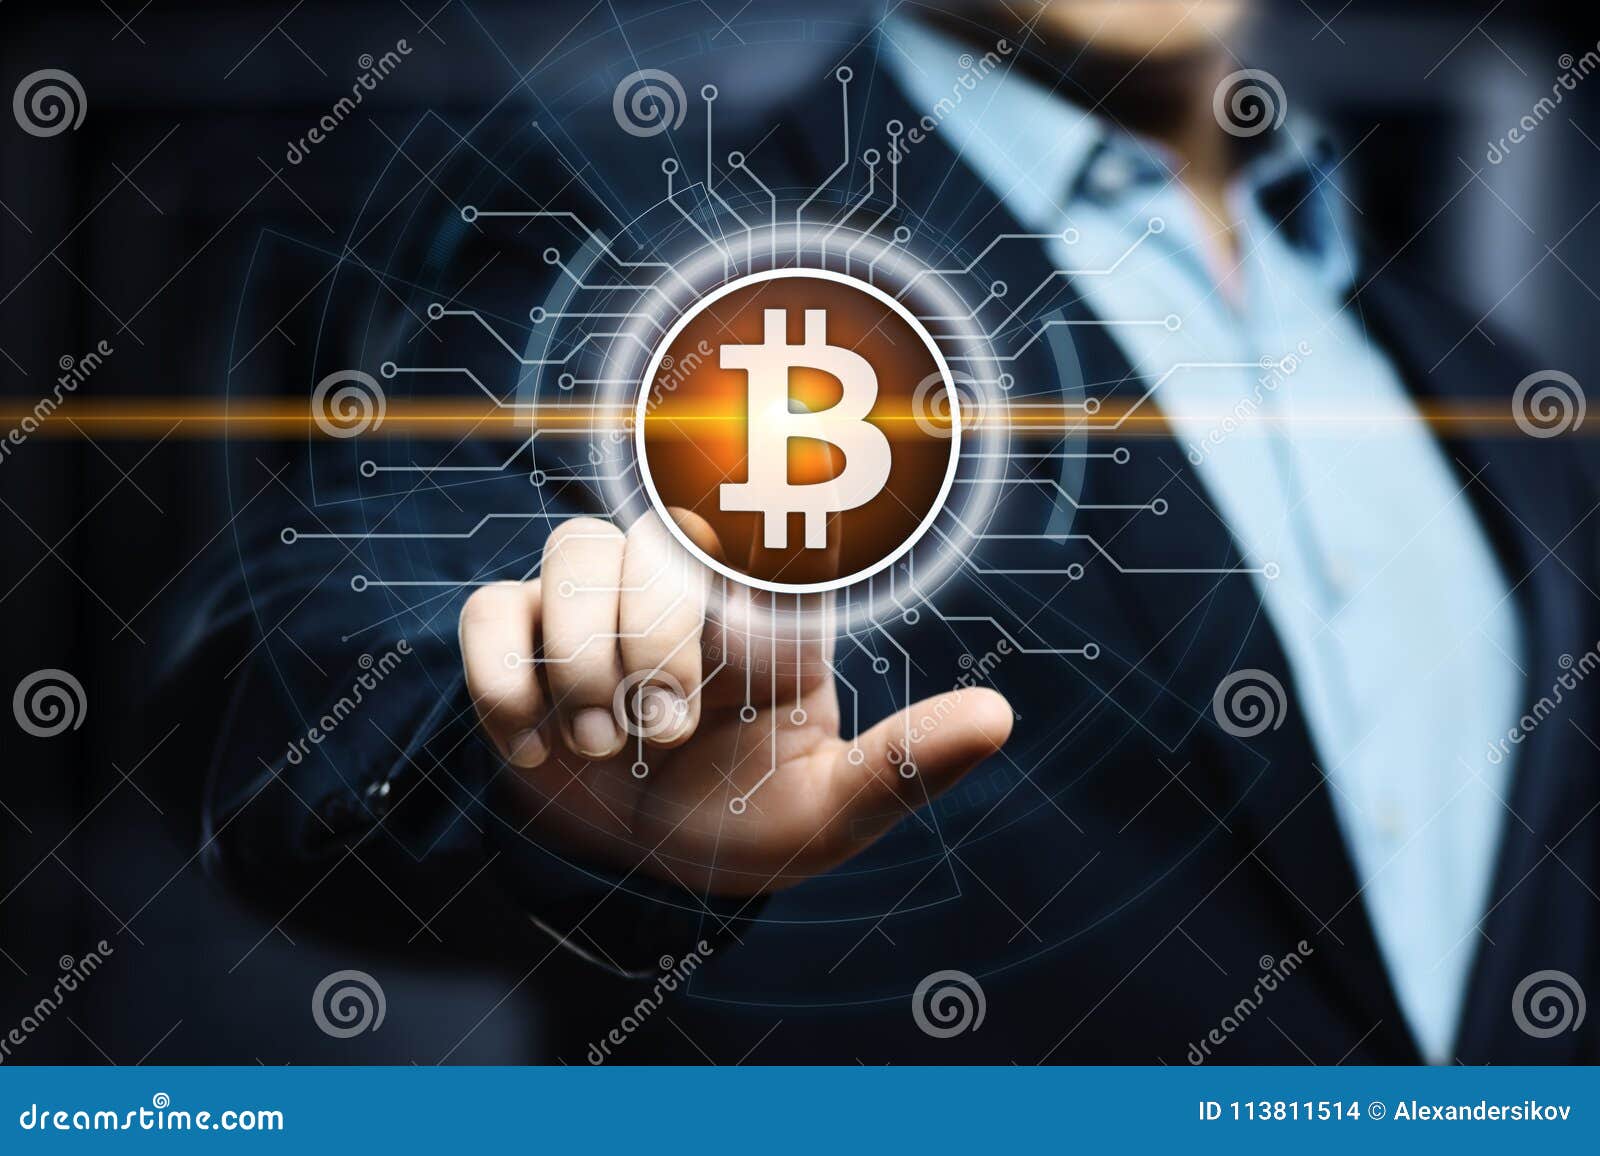 bitcoin cryptocurrency digital bit coin btc currency technology business internet concept